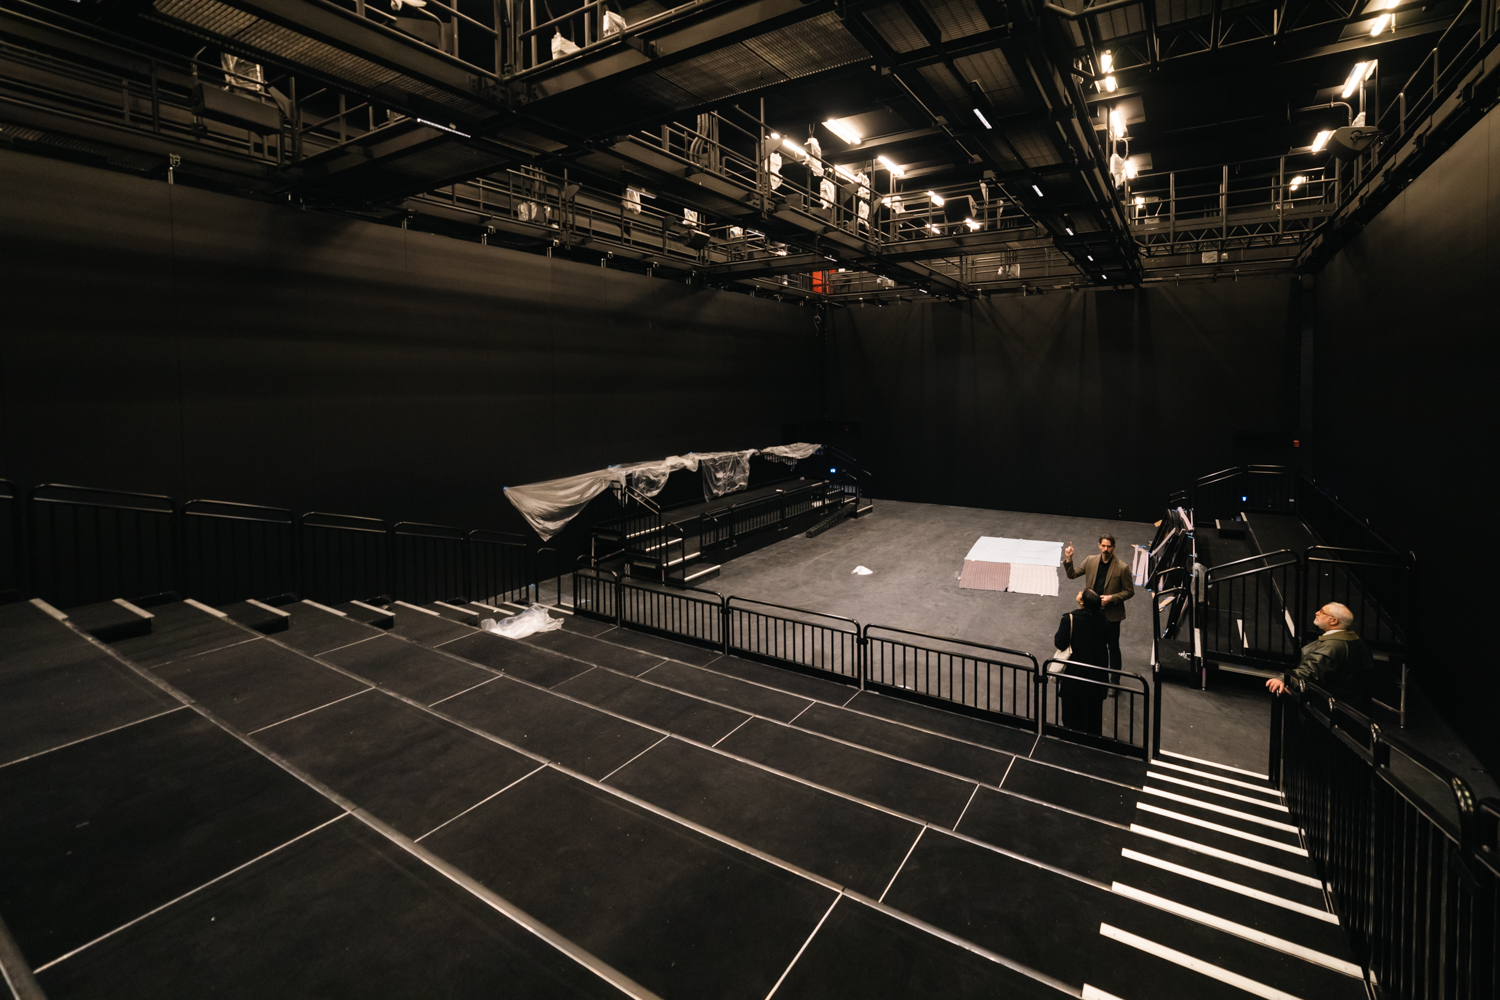 A black box theater with all black structures, floors, and grandstands.